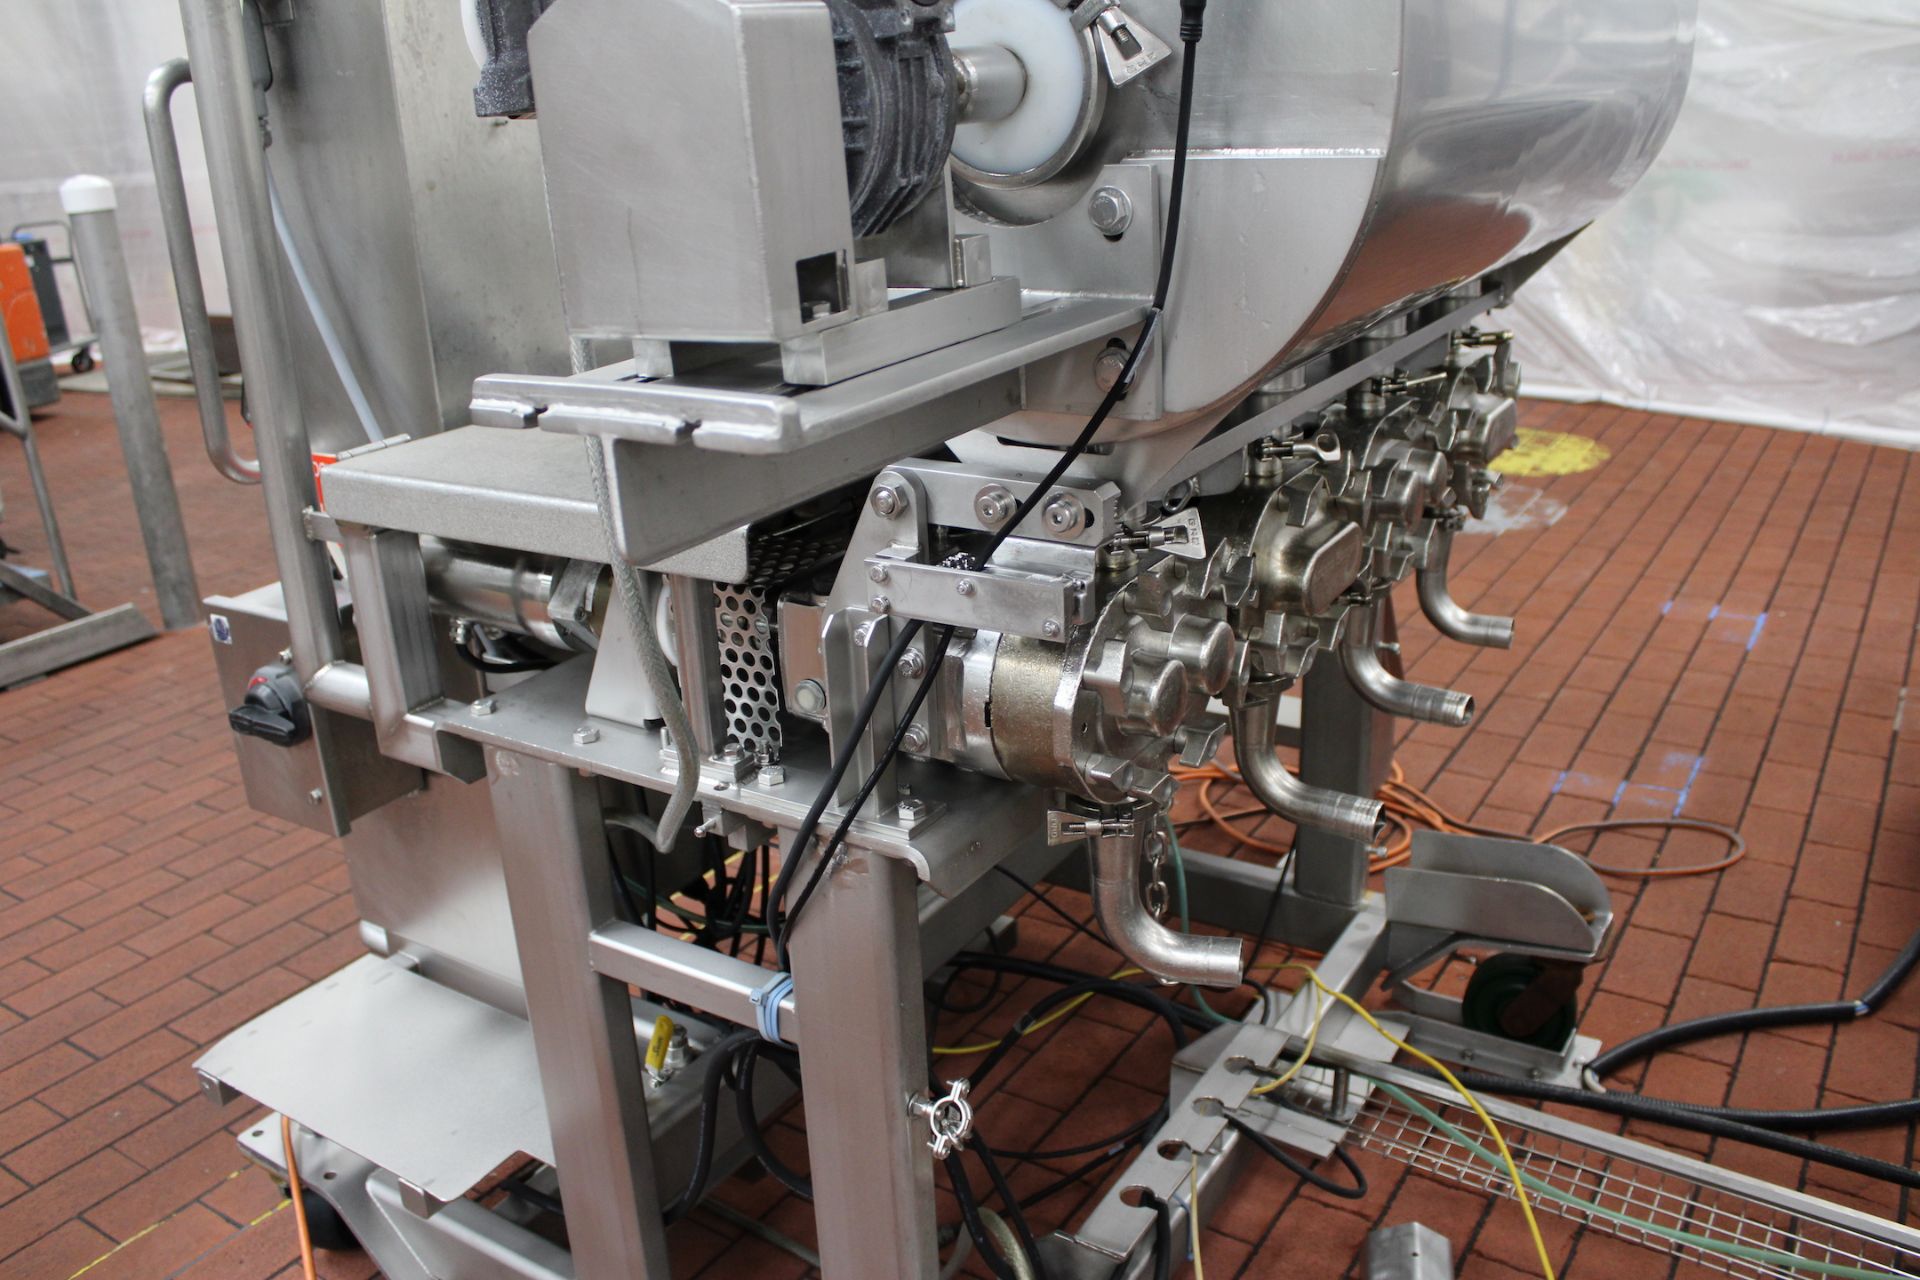 HINDSBOCK 4-WIDE SAUCE APPLICATOR / FILLER, EQUIPPED WITH SERVO DRIVEN AMPCO AND WAUKESHA CHERRY